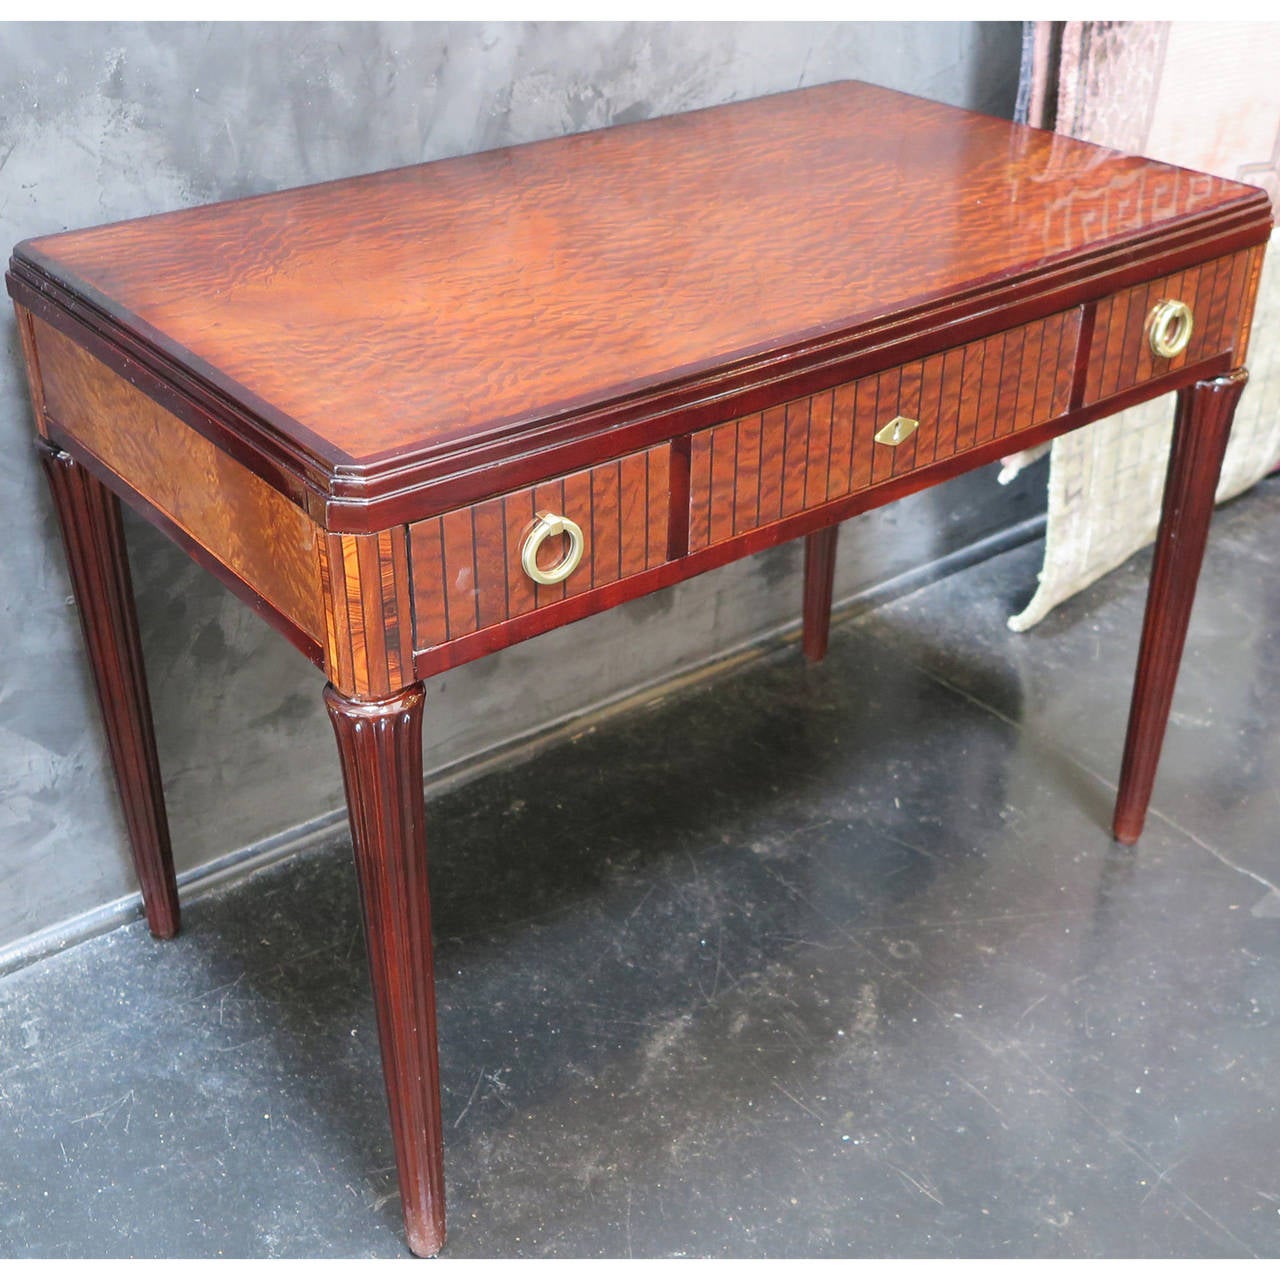 French Art Deco vanity/ desk from the 1930s. Sapele Pommele and mahogany veneer with fluted lacquer legs and marquetry detailing on edges. Original bronze hardware pulls with three pull-out drawers.